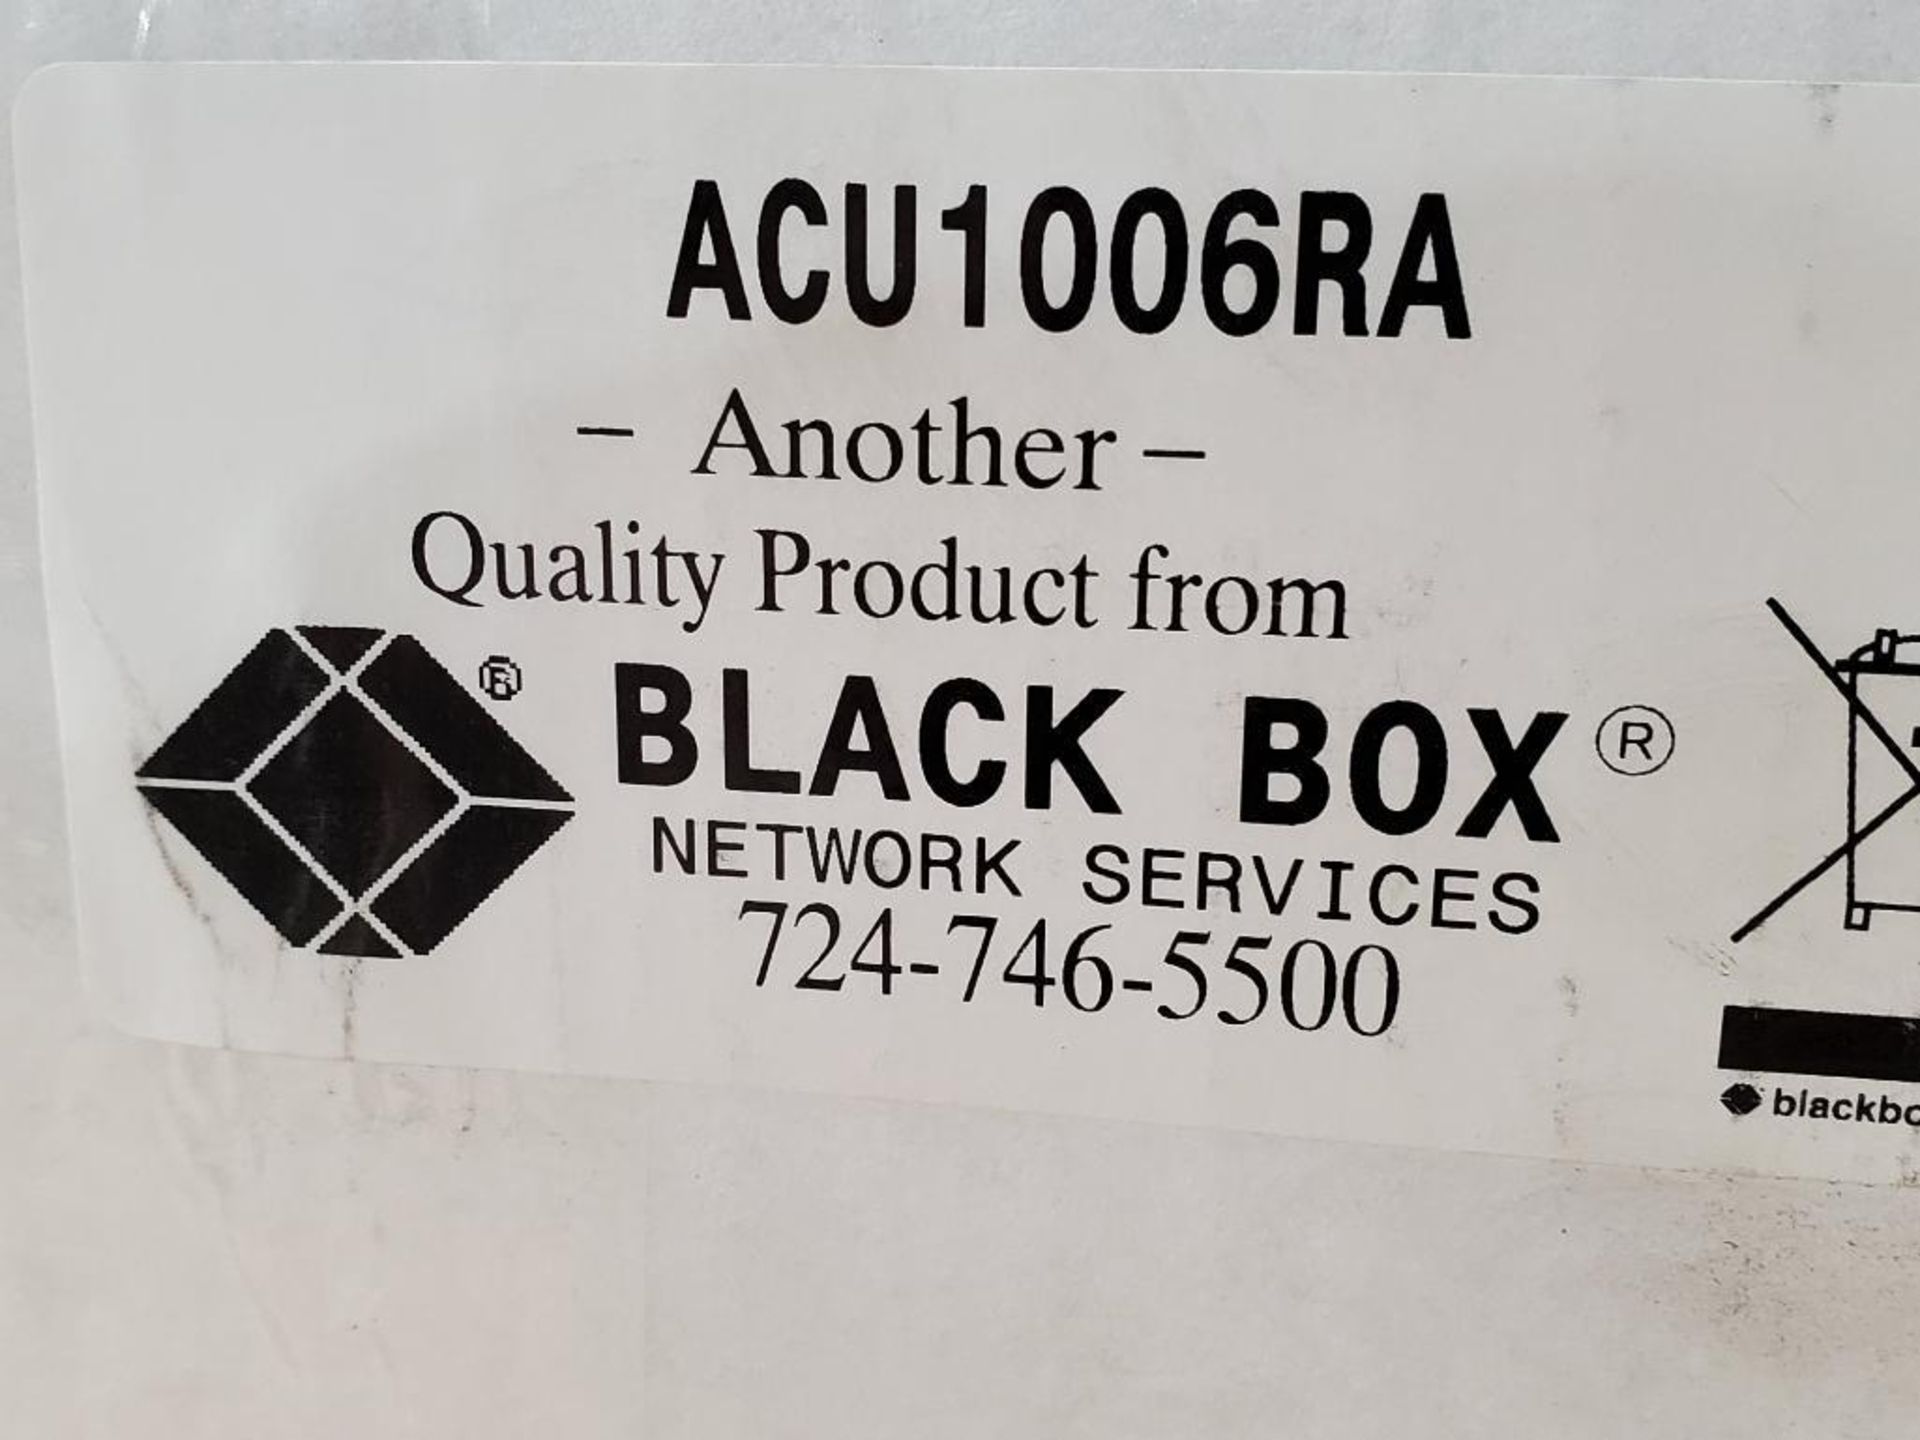 Black box network equipment. Part number ACU1006RA. - Image 2 of 3